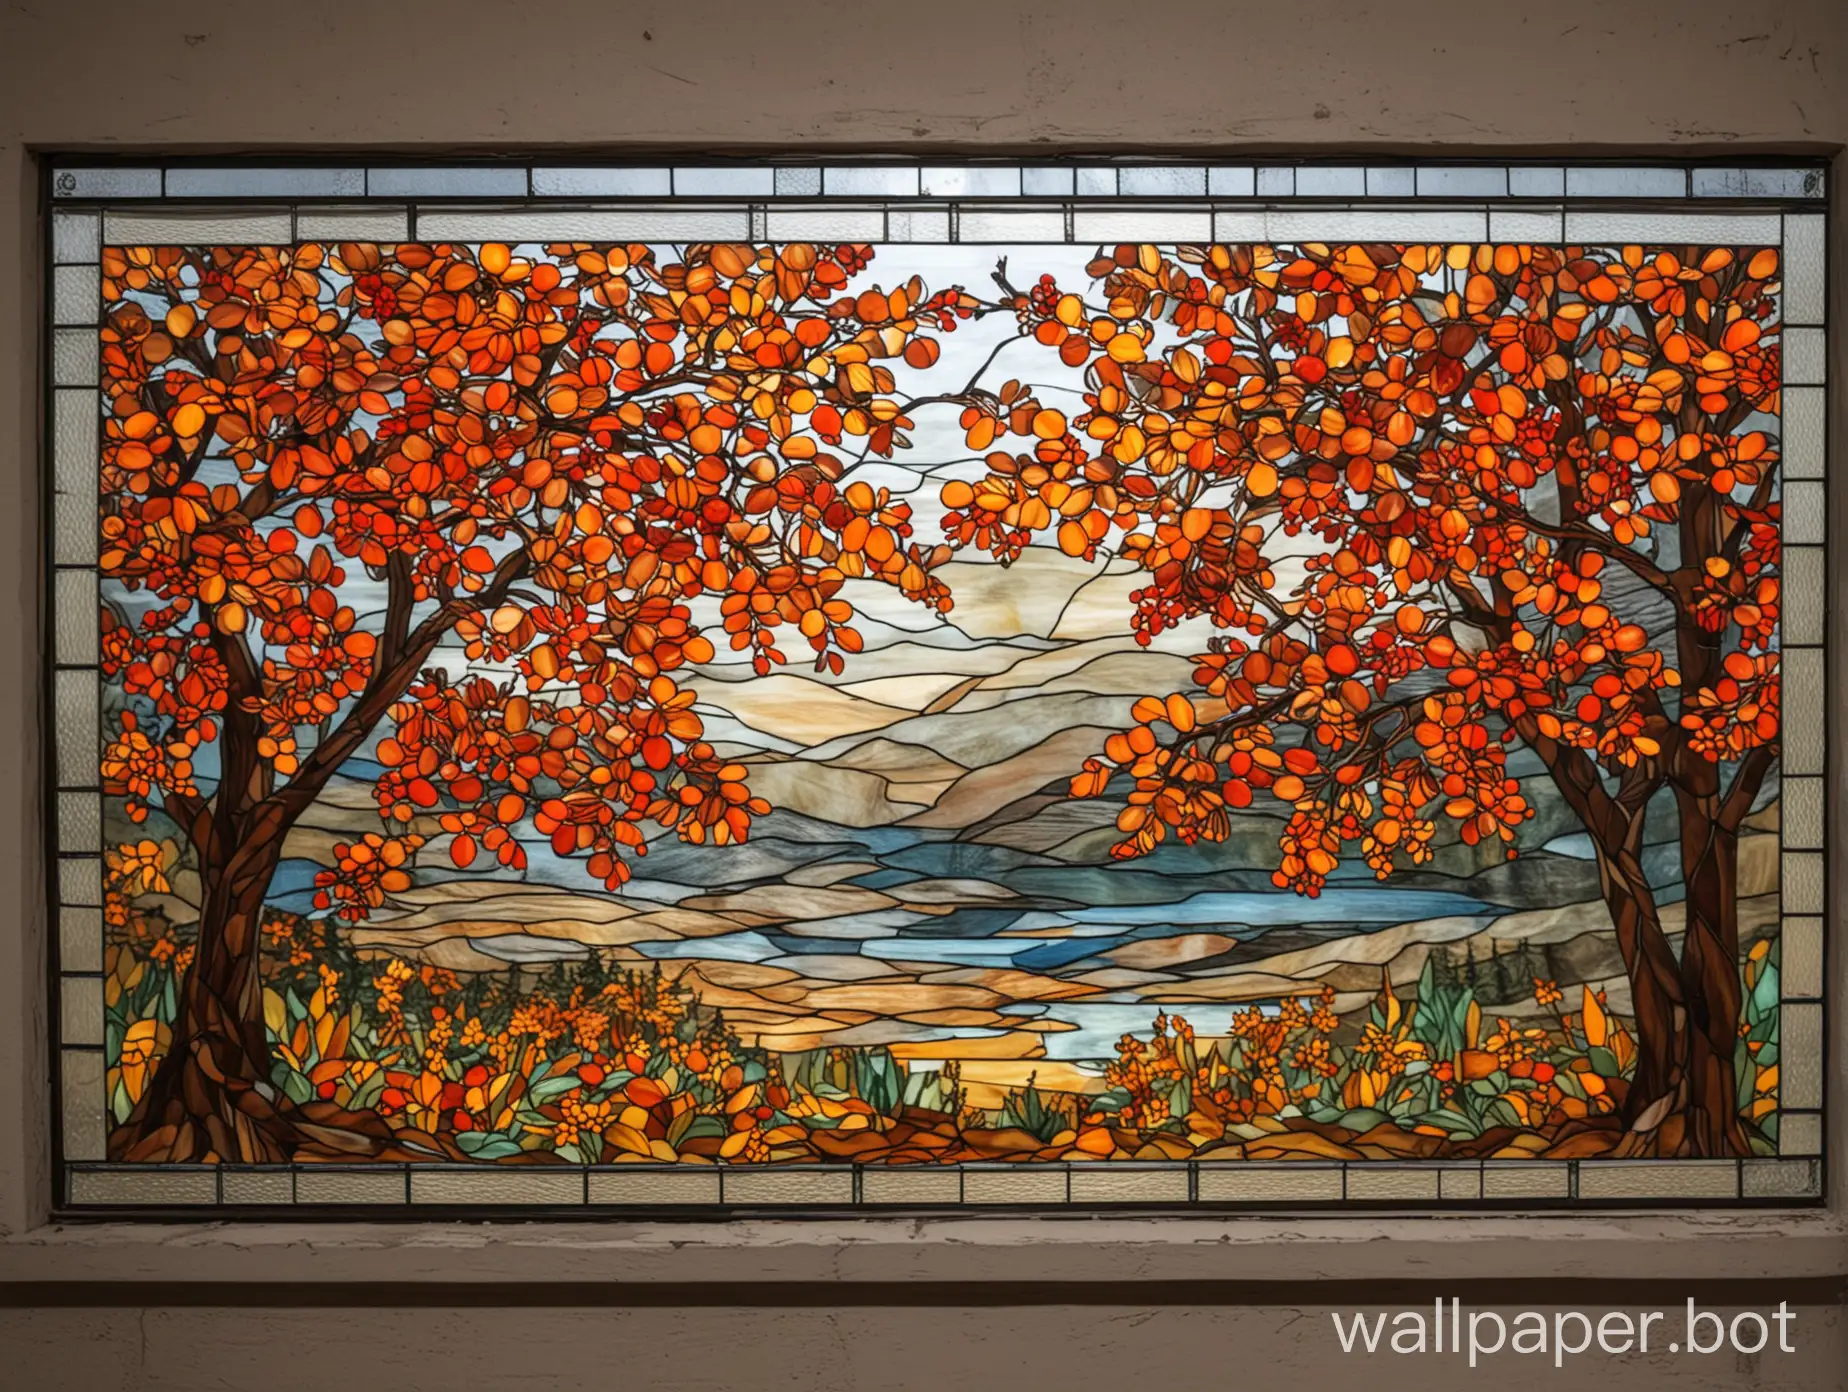 Autumn-Rowan-Stained-Glass-Window-Vibrant-Depiction-of-Natures-Beauty